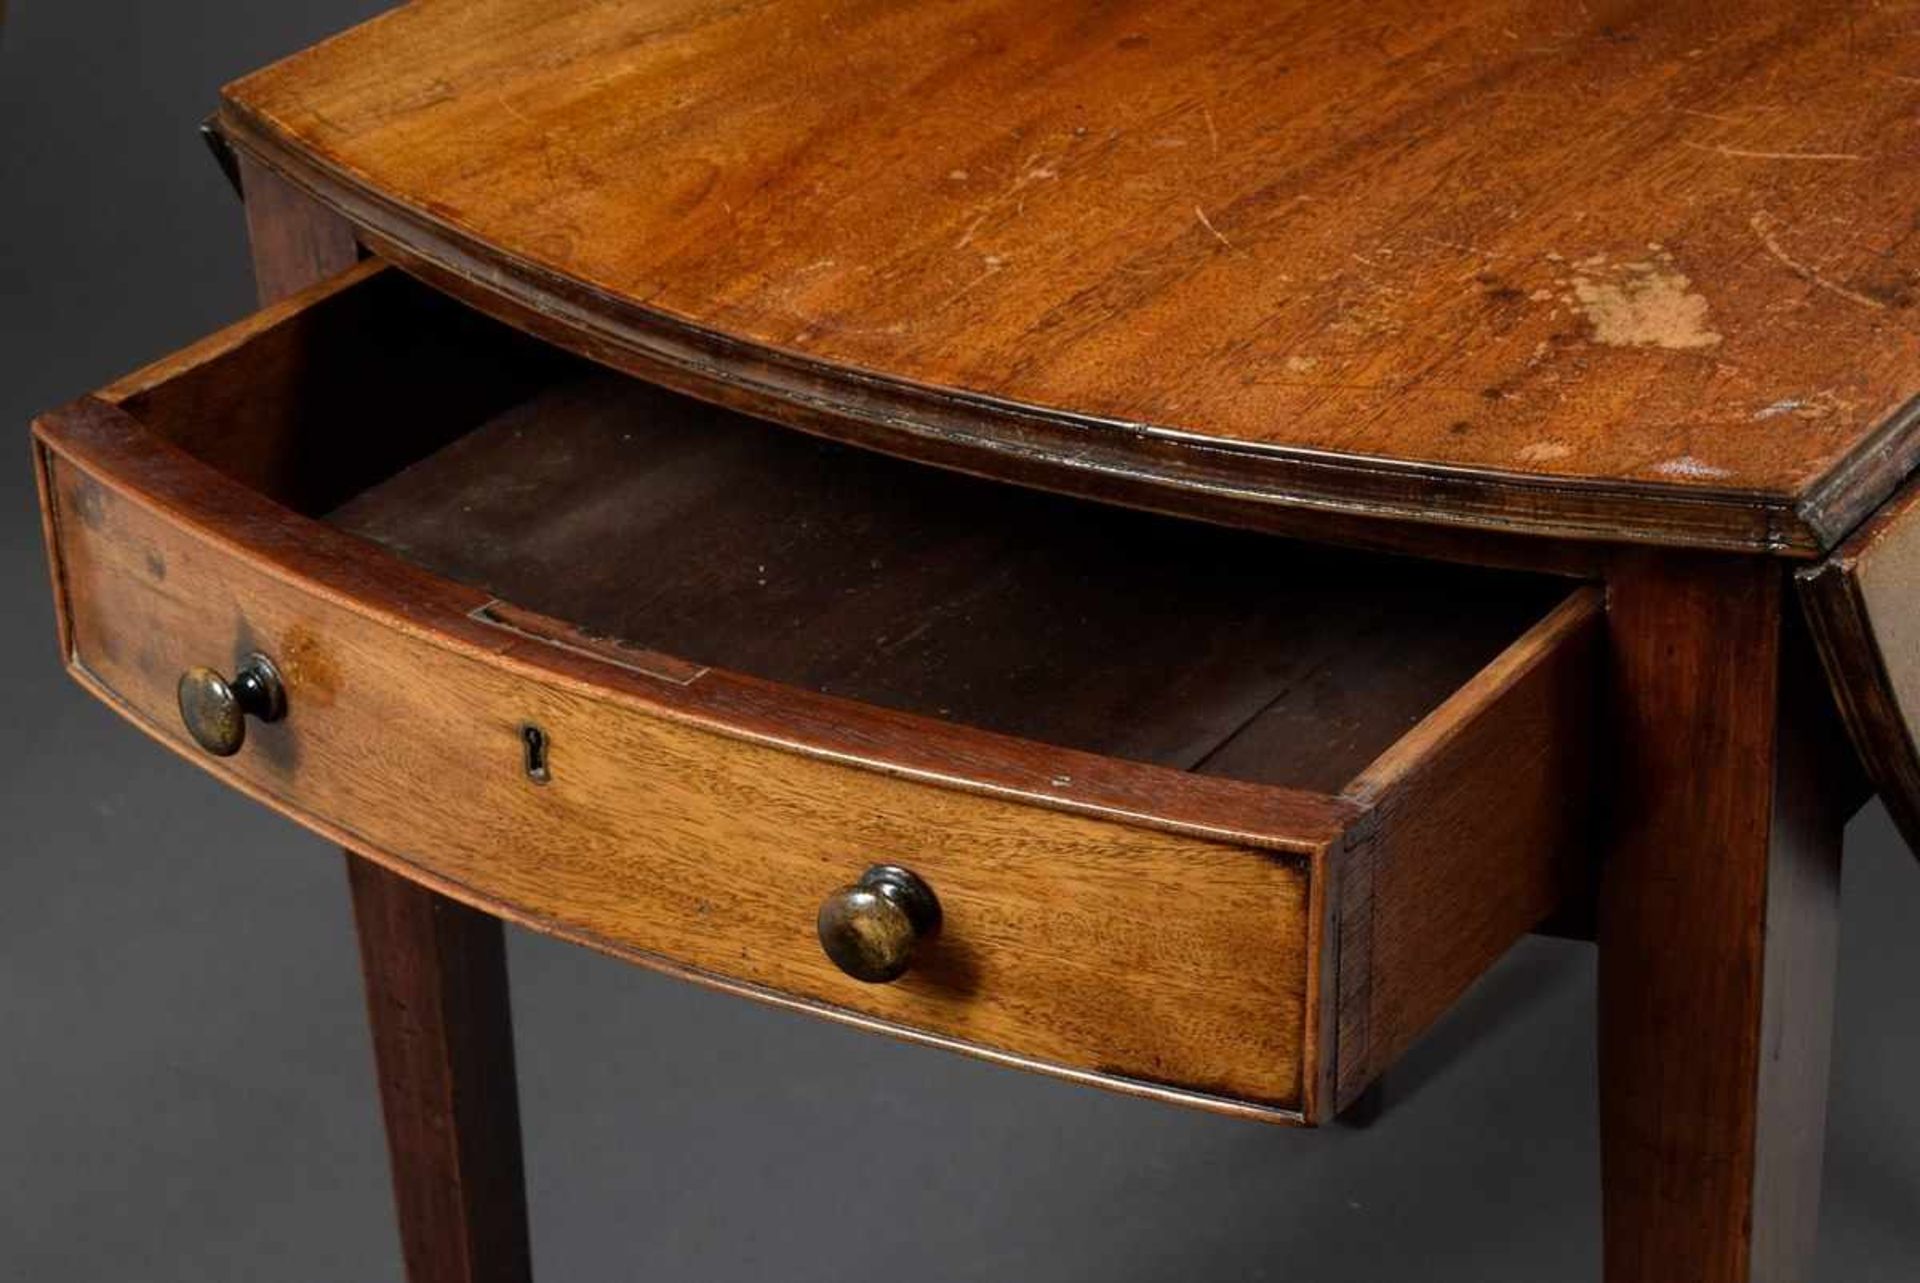 English mahogany pembroke table with semicircular side flaps and 2 drawers, 19th century, 71x47(95) - Image 4 of 4